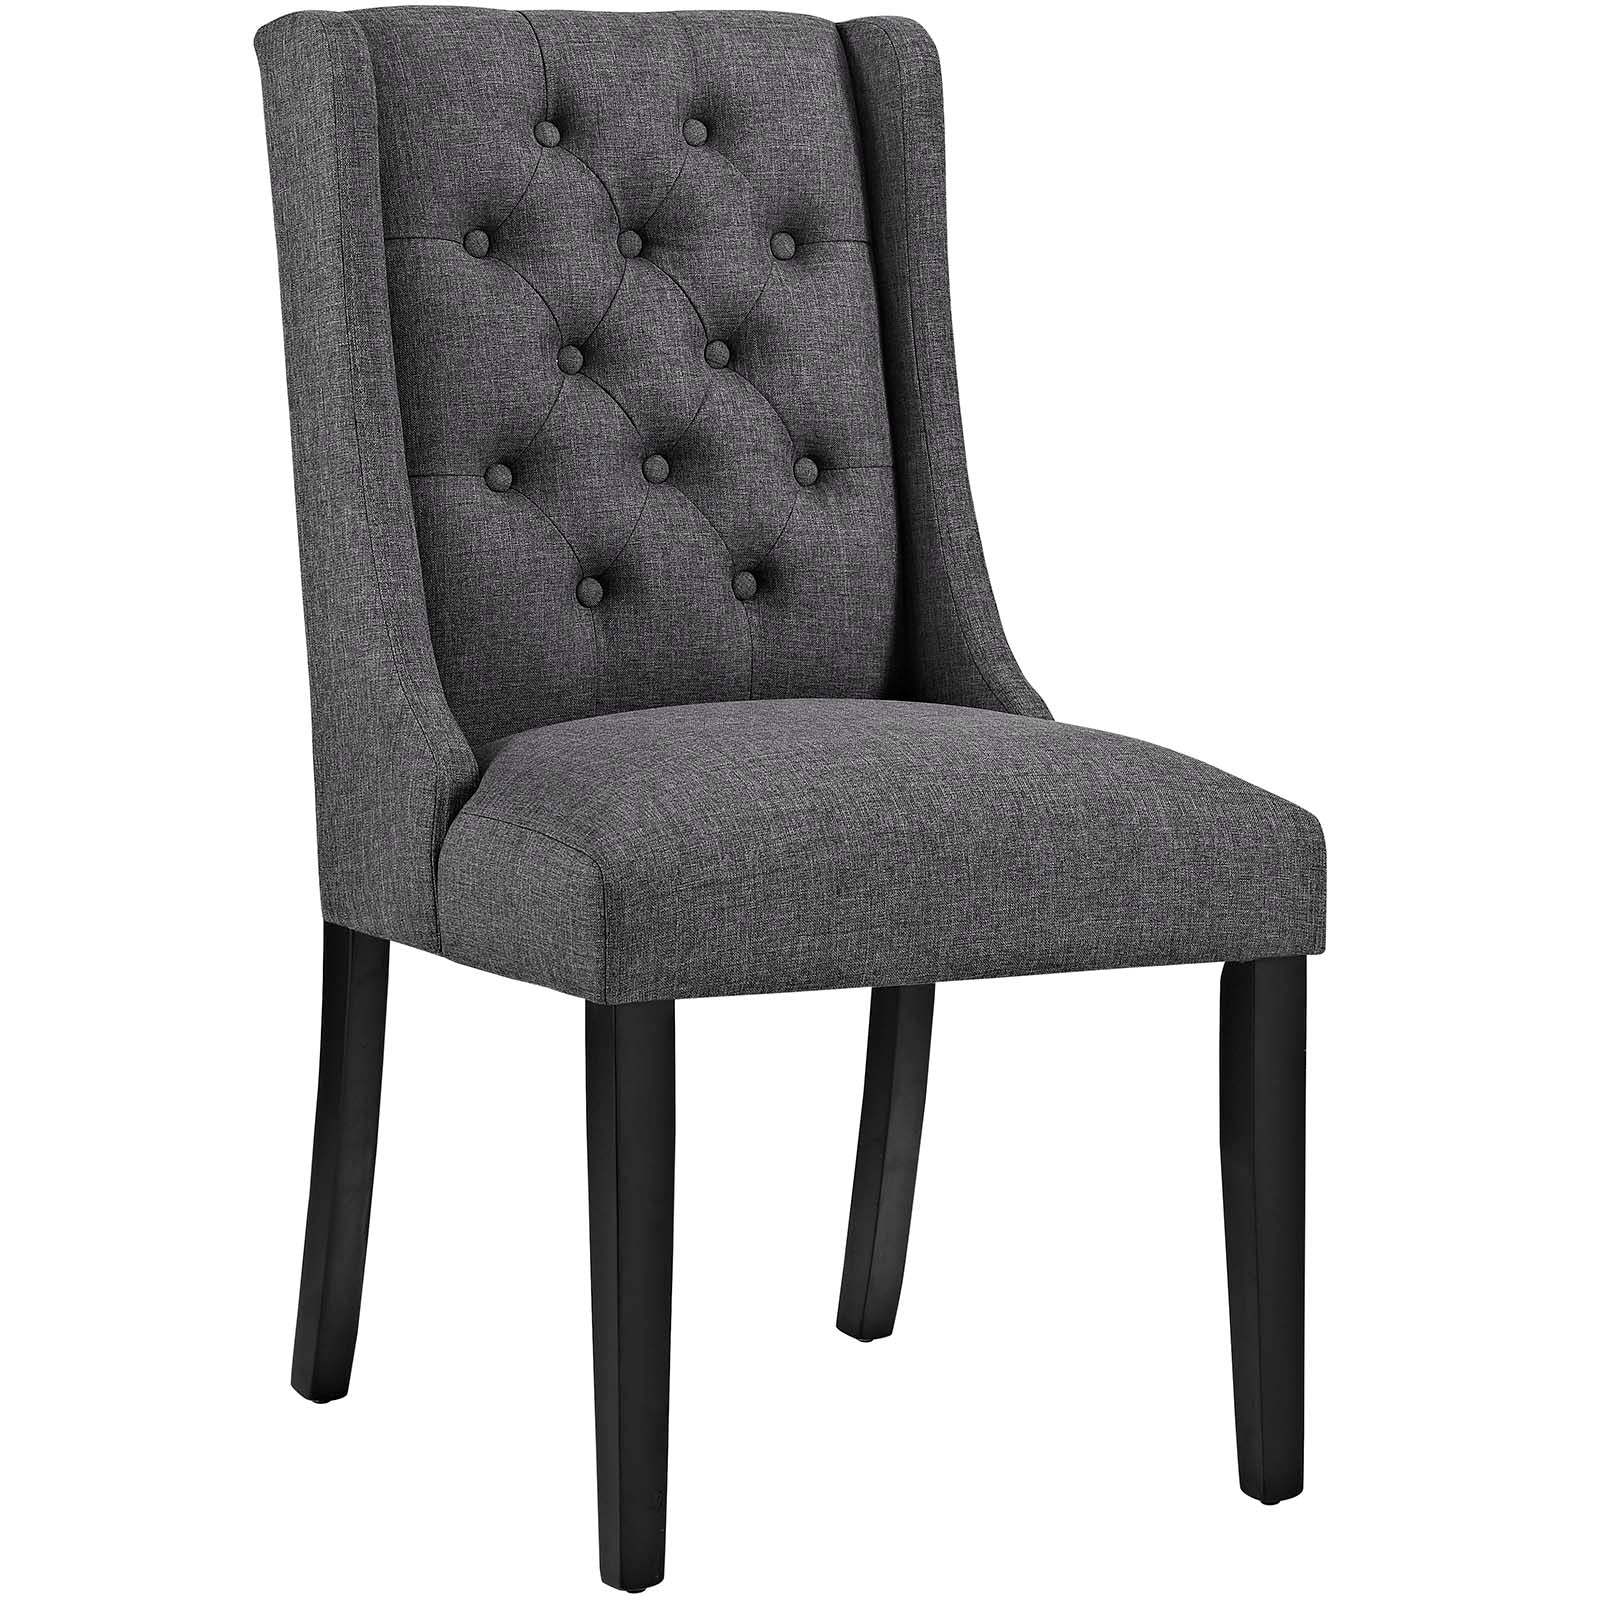 Baronet Dining Chair Fabric Set of 2 - East Shore Modern Home Furnishings